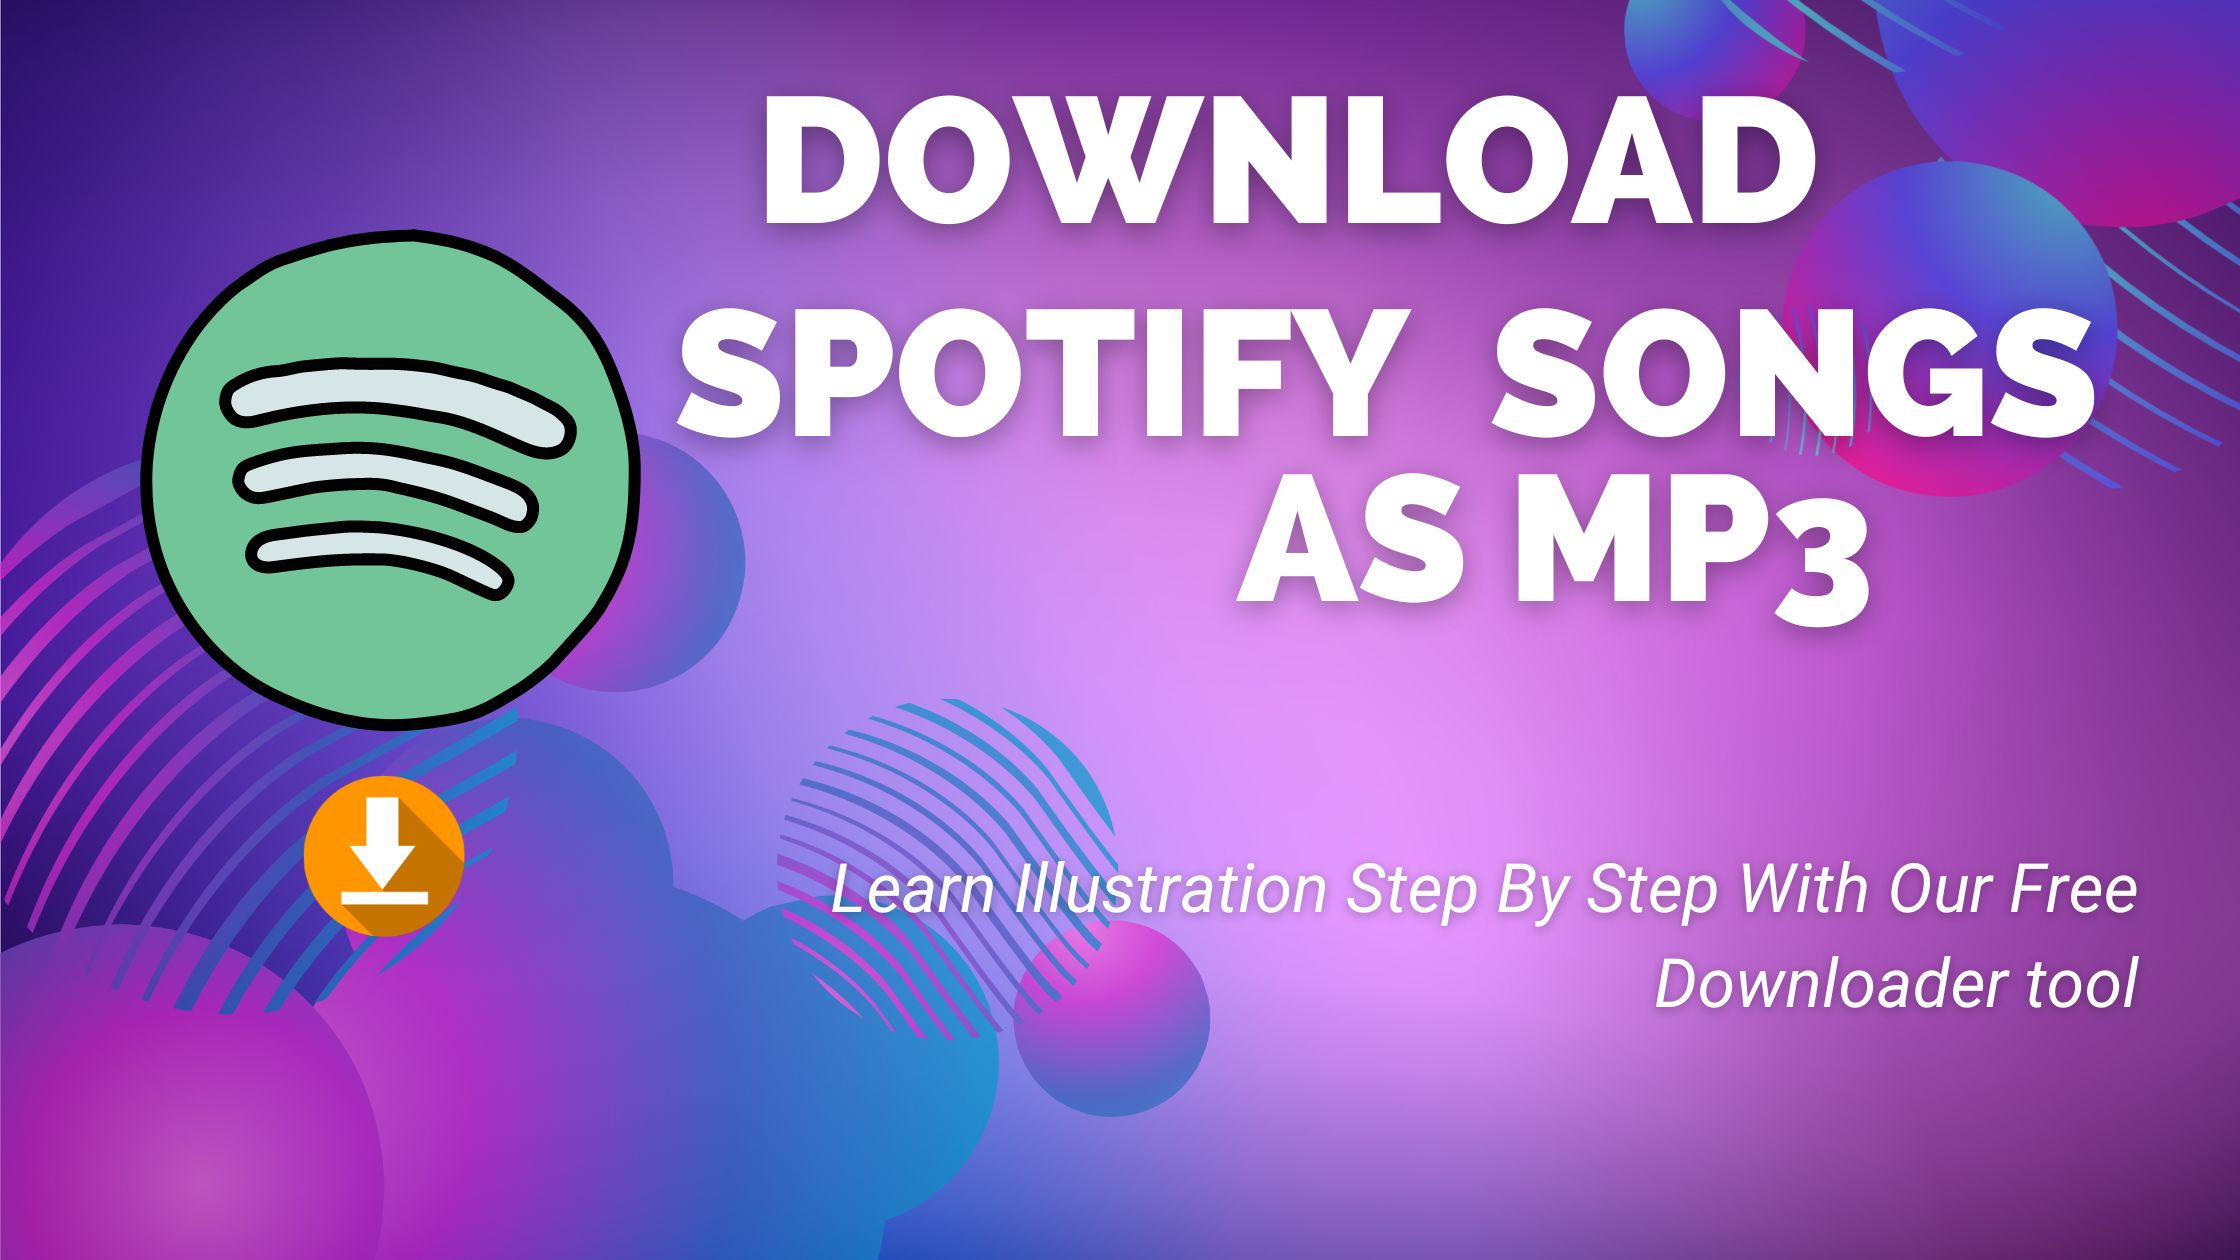 How To Download Music On Spotify To MP3